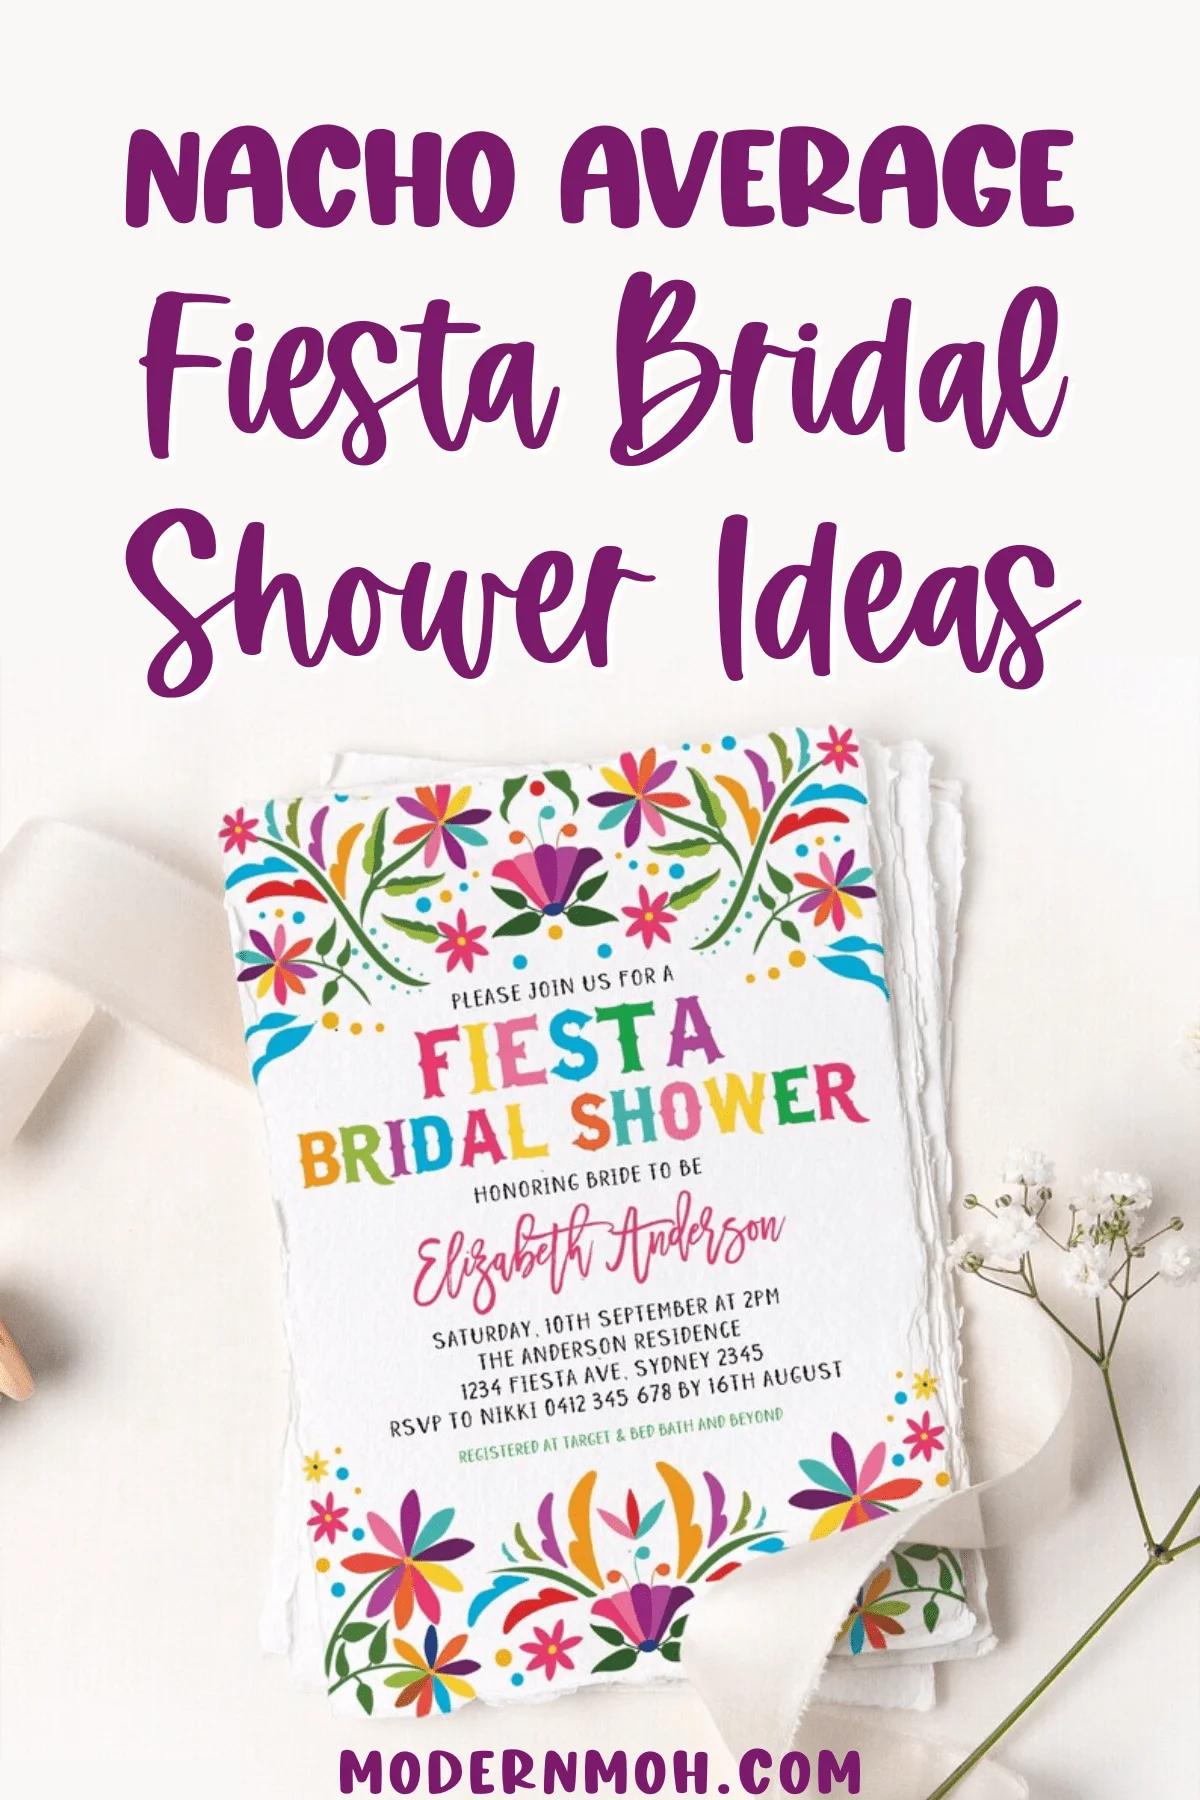 How to Throw a Fiesta Bridal Shower